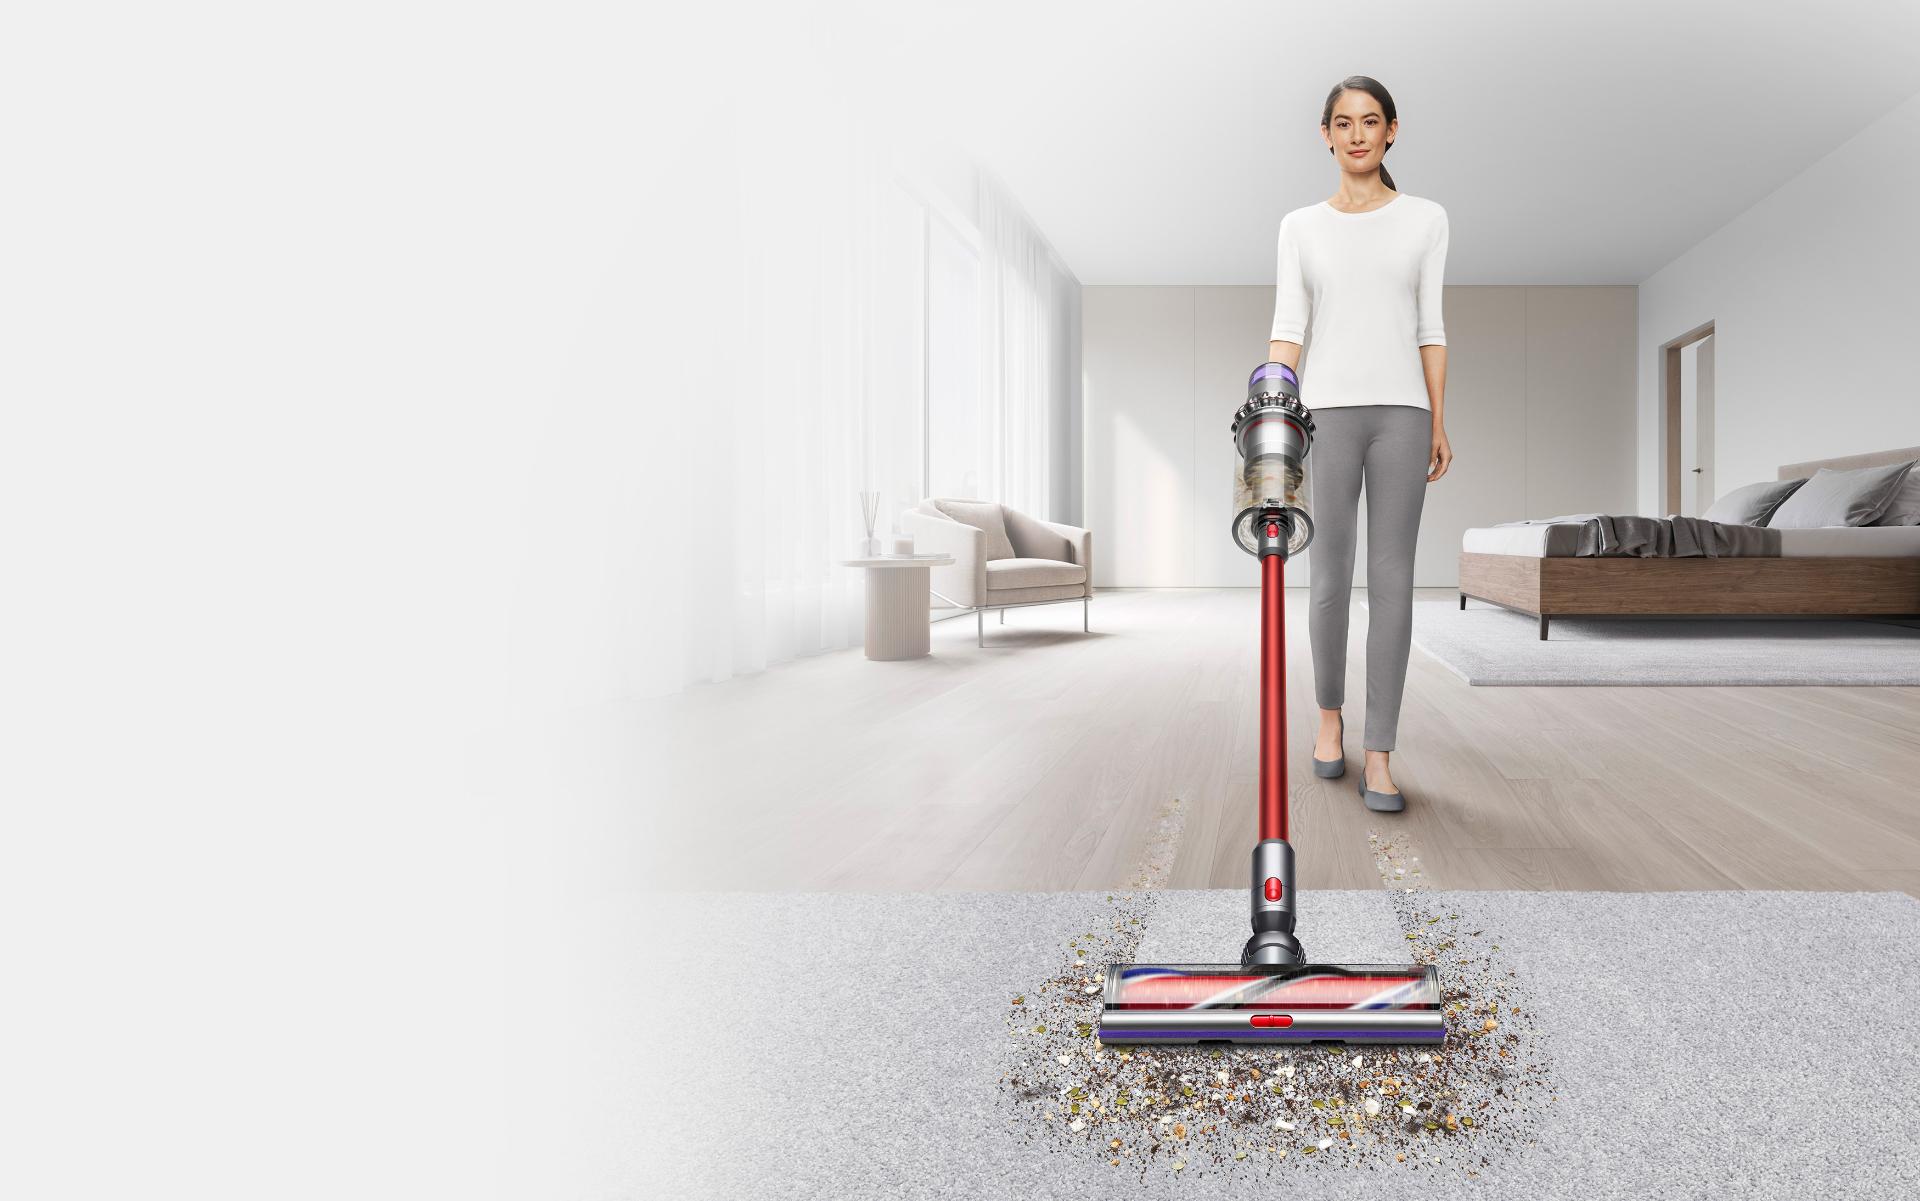 Video of Dyson Outsize vacuum cleaning a carpet